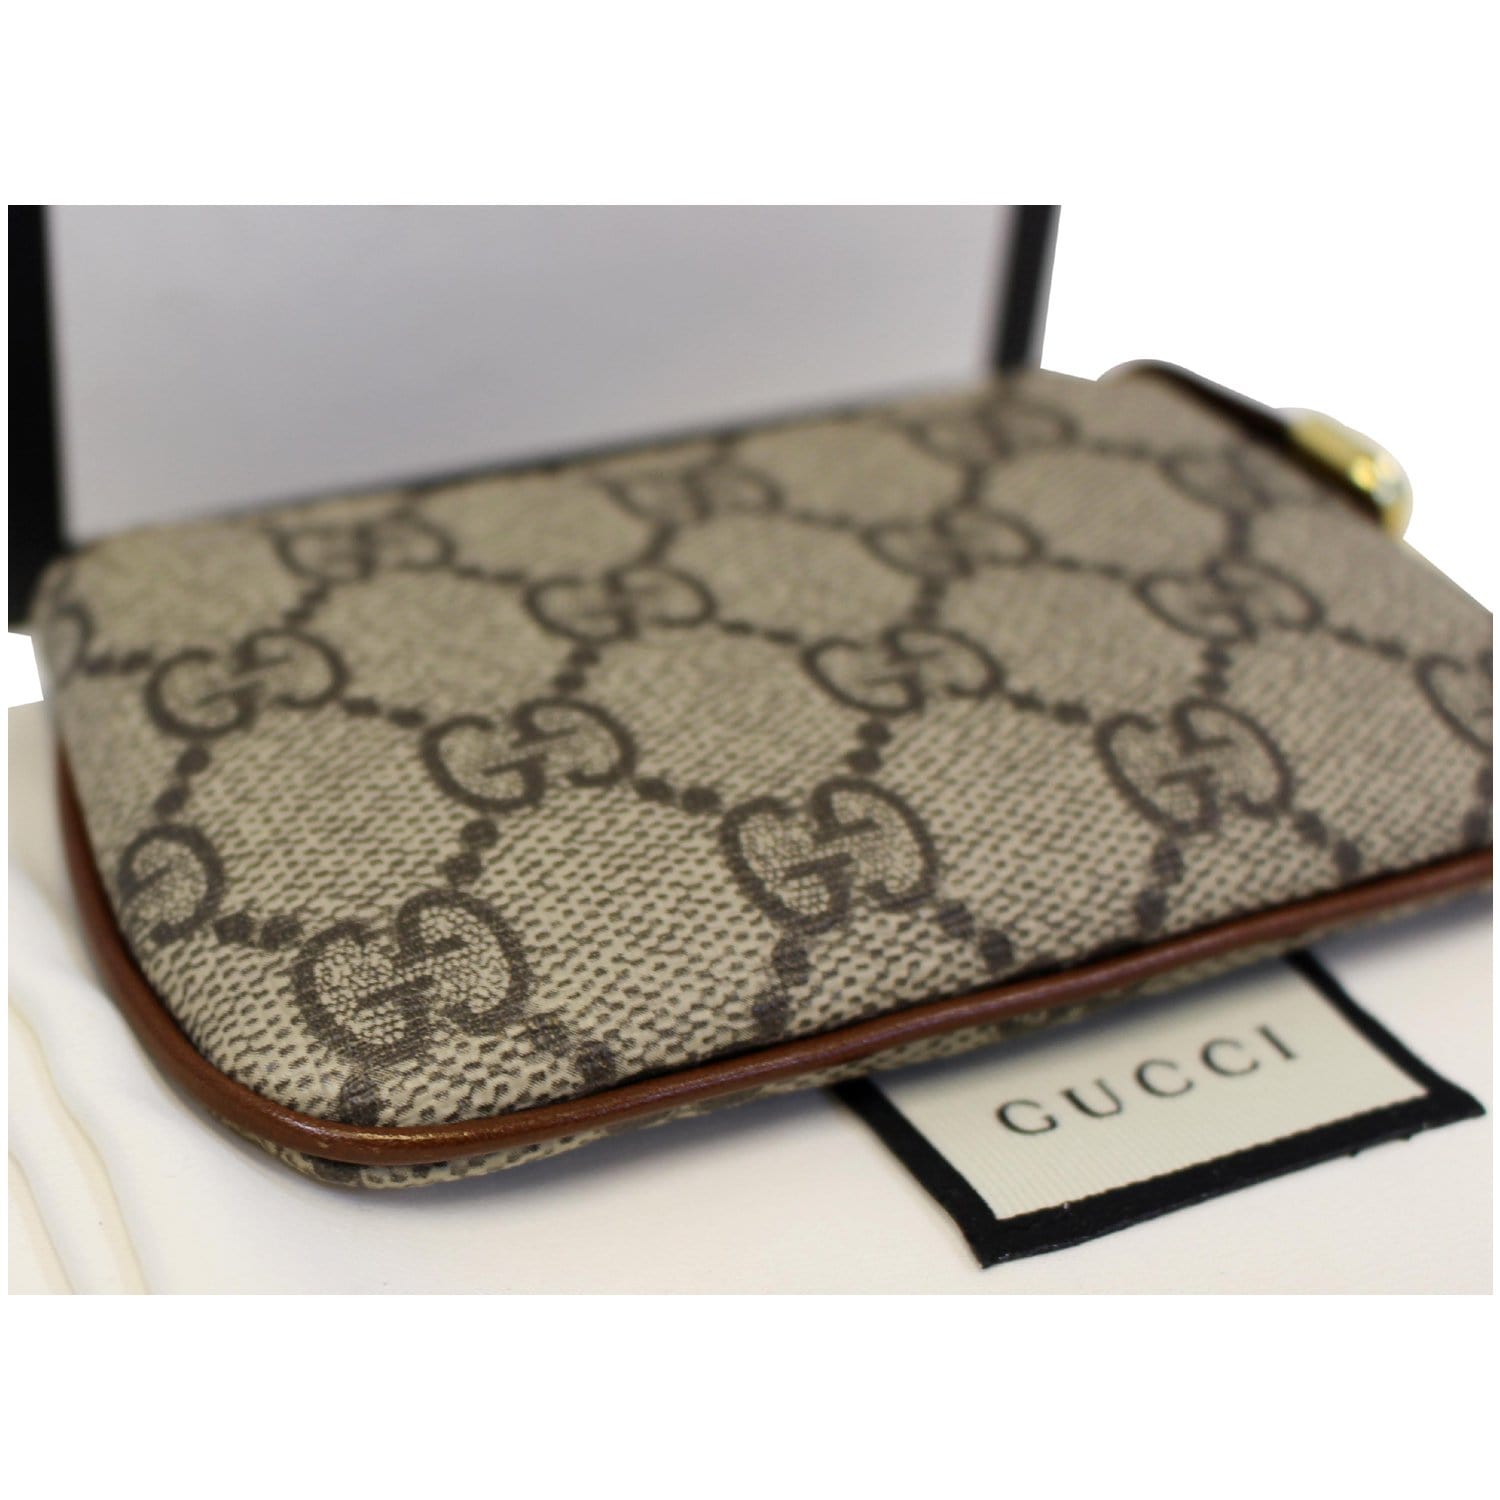 Gucci Ophidia Gg Key Case